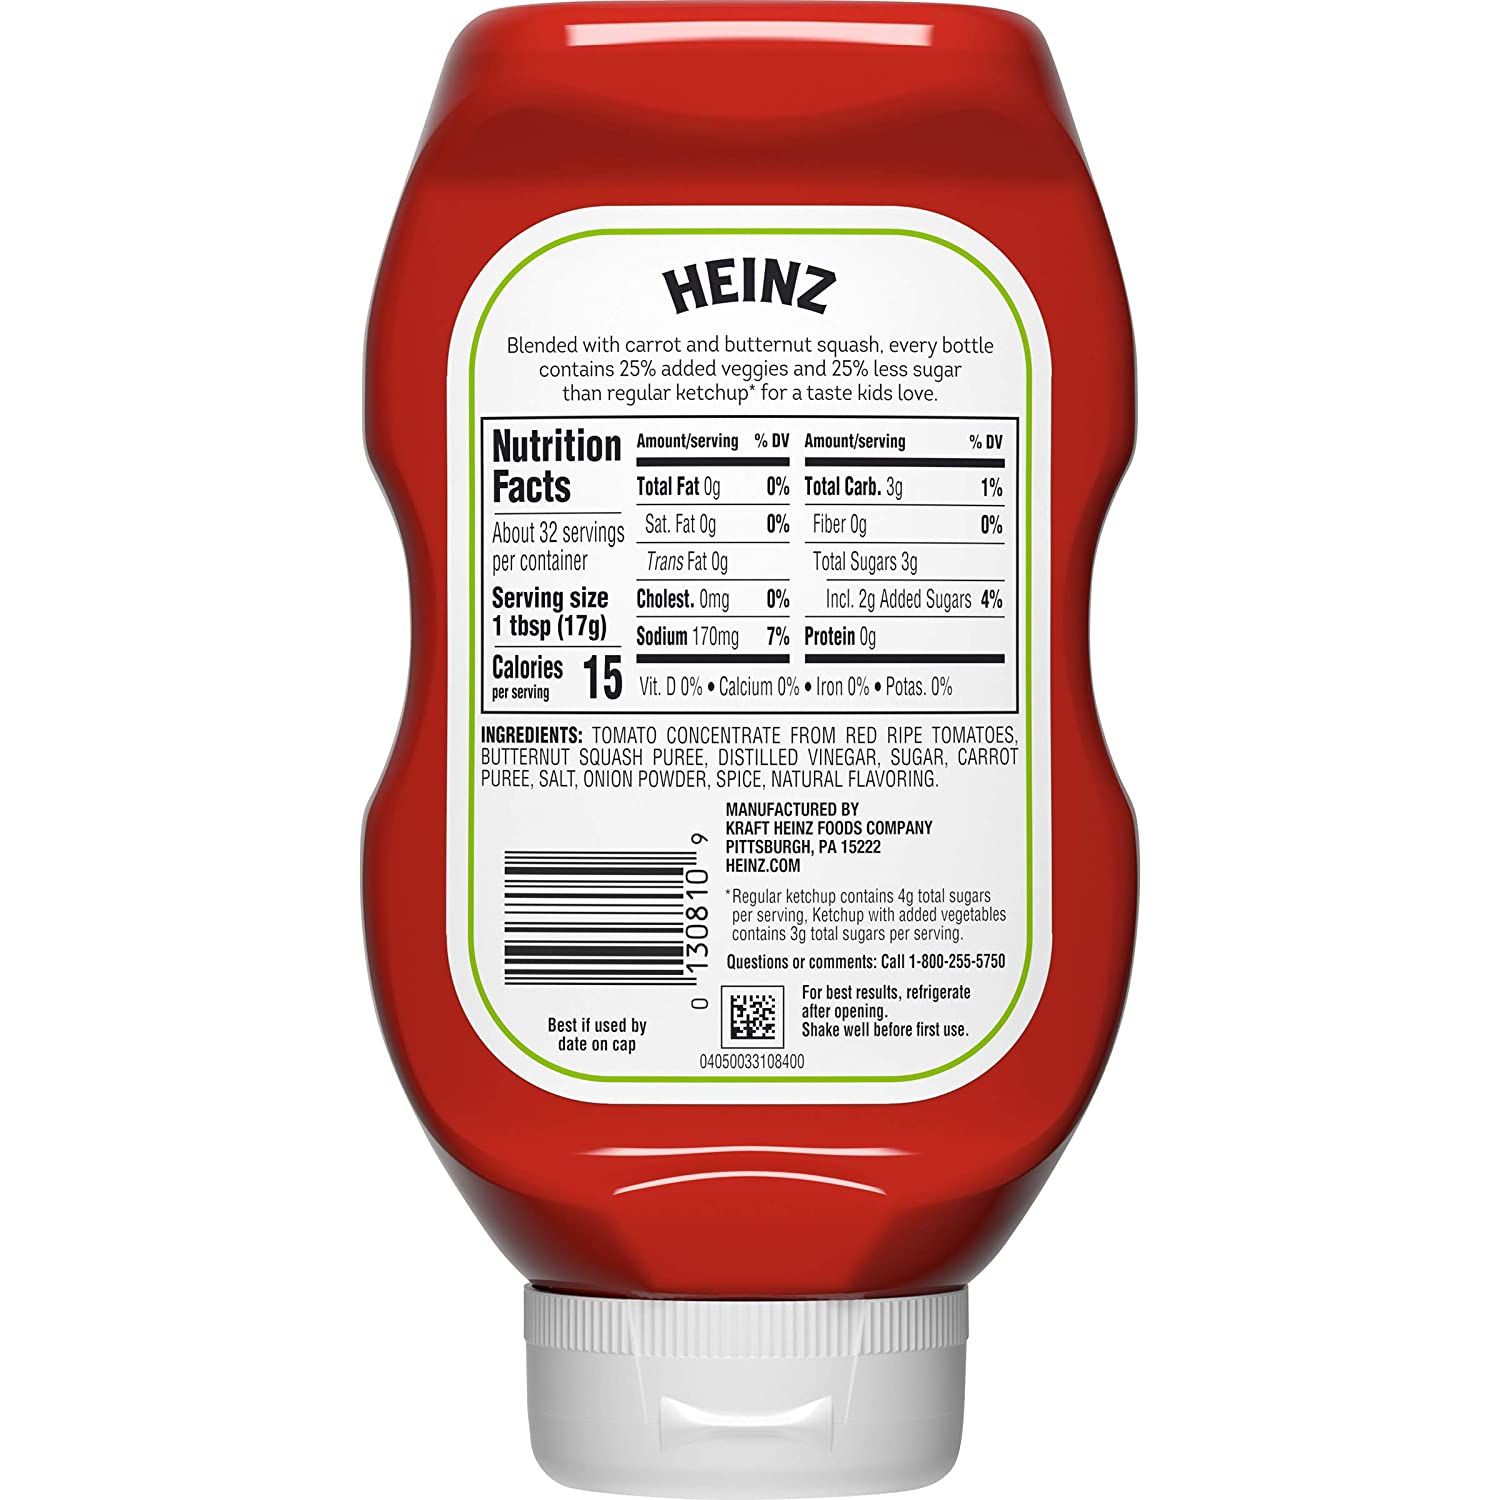 Heinz Tomato Ketchup with a Blend of Veggies Image